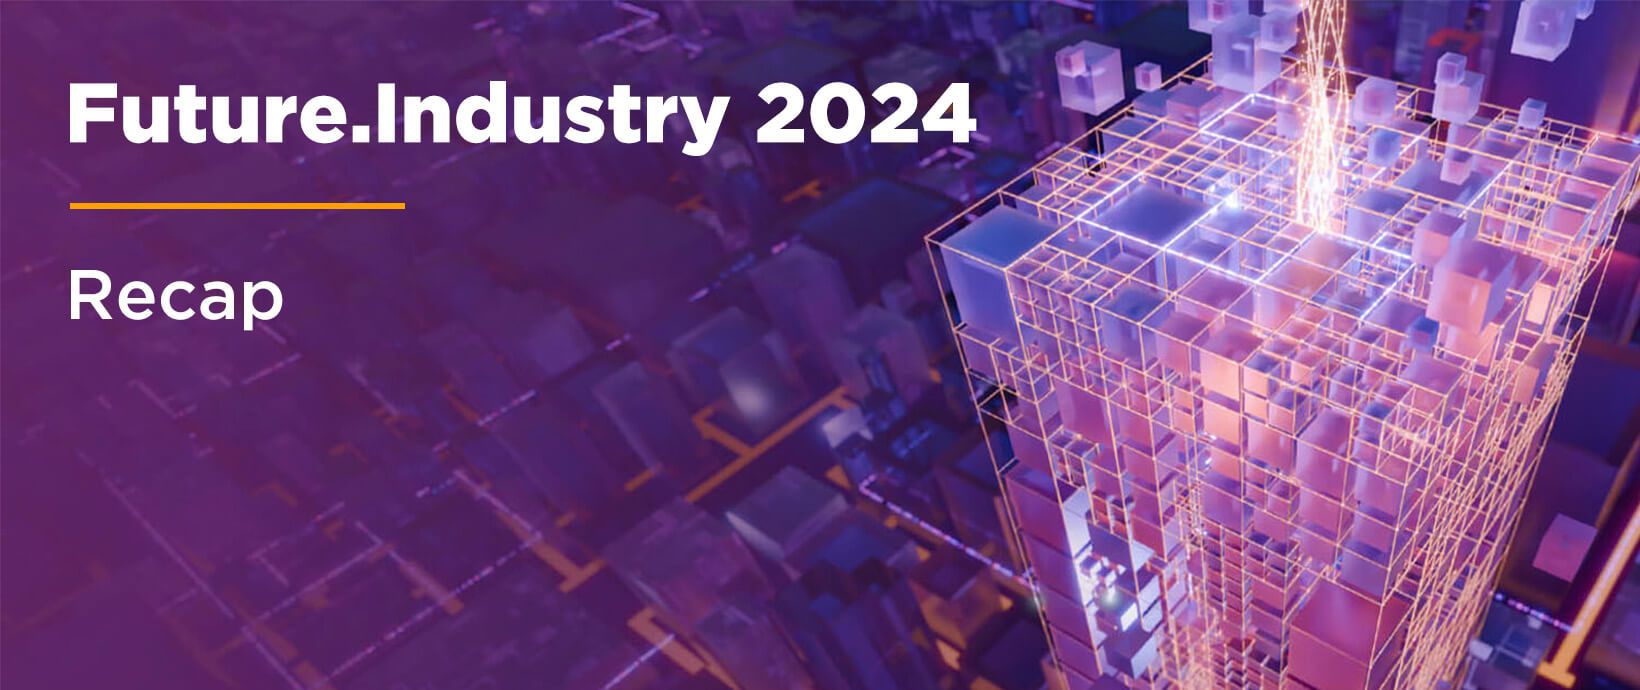 Five Can’t-Miss Presentations from Future.Industry 2024